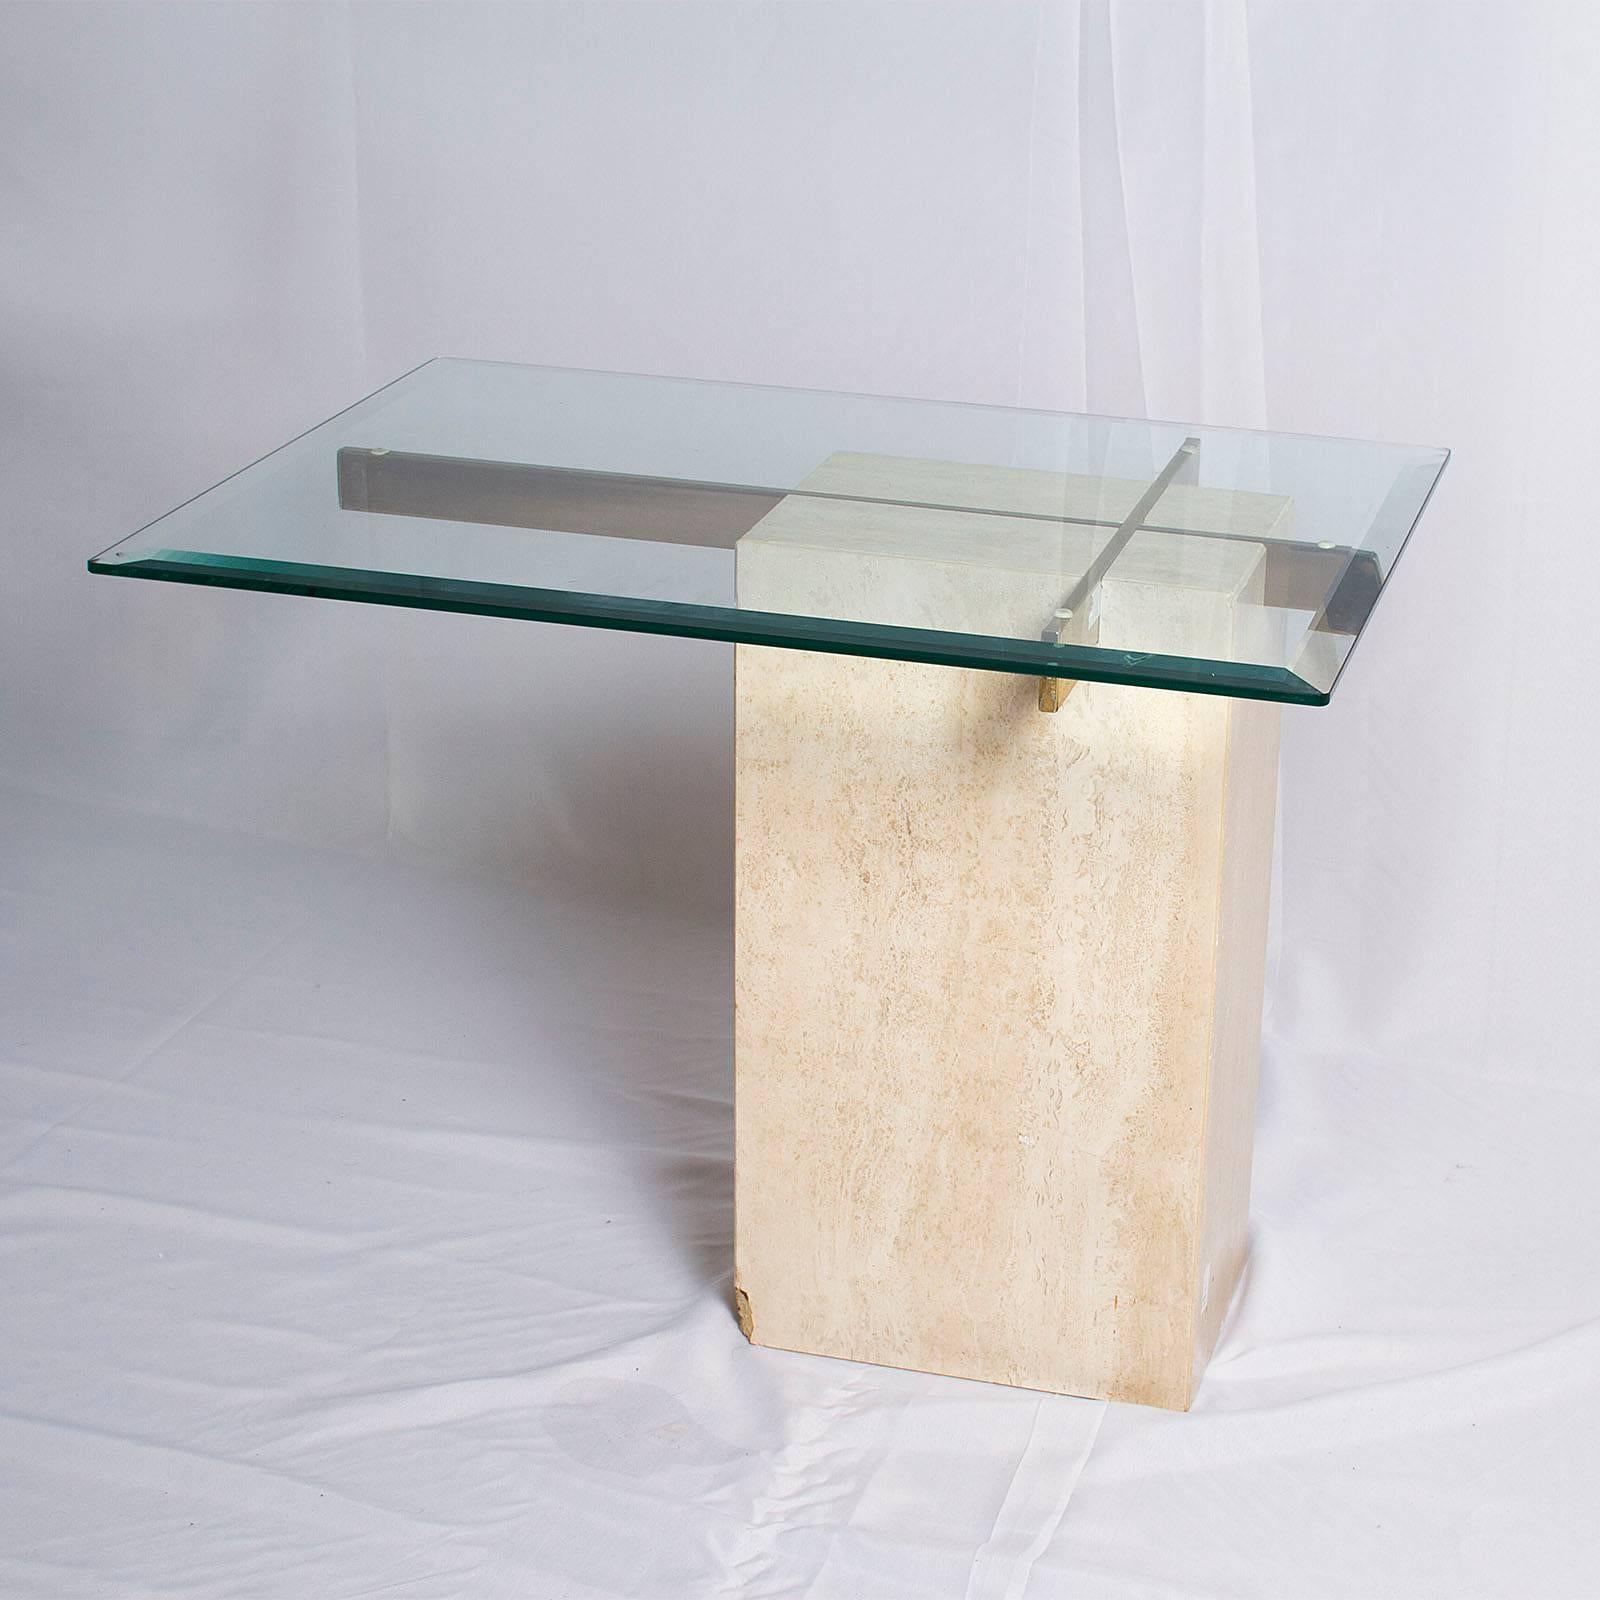 Travertine side table attributed to Giovanni Offredi

Please contact us for delivery details.